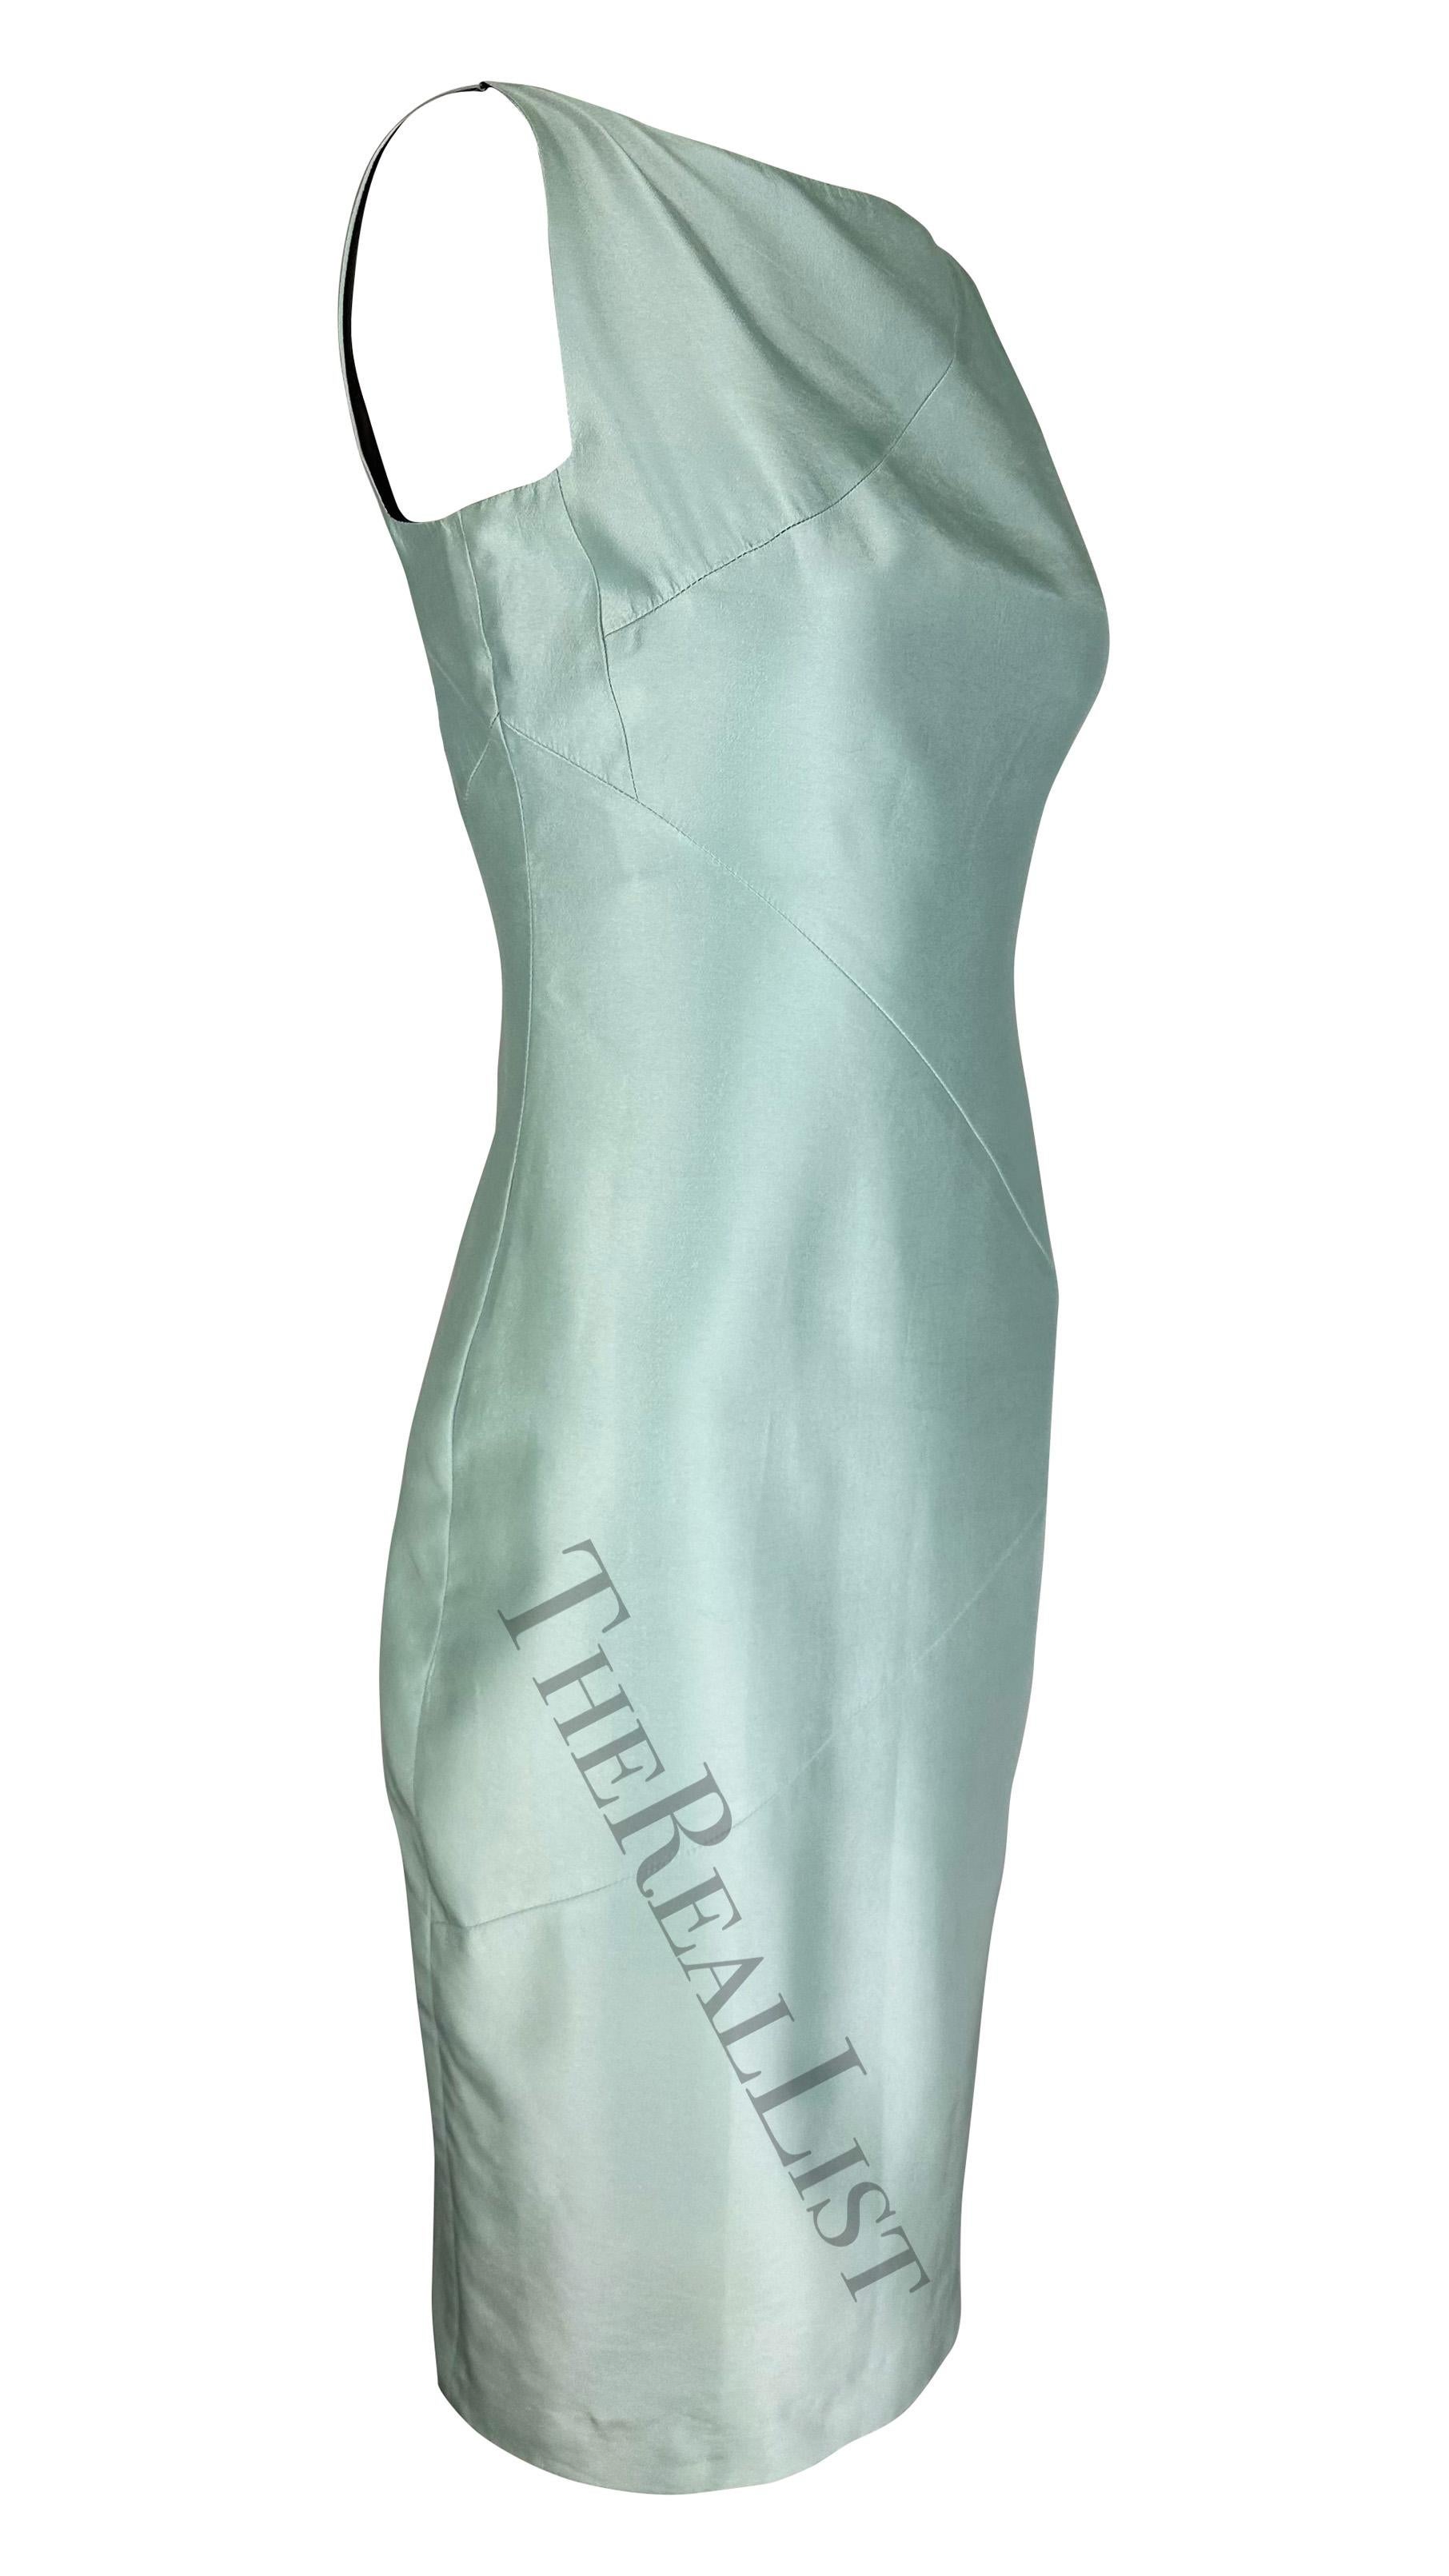 S/S 1998 Gucci by Tom Ford Runway Ad Light Blue Silk Pencil Dress For Sale 4